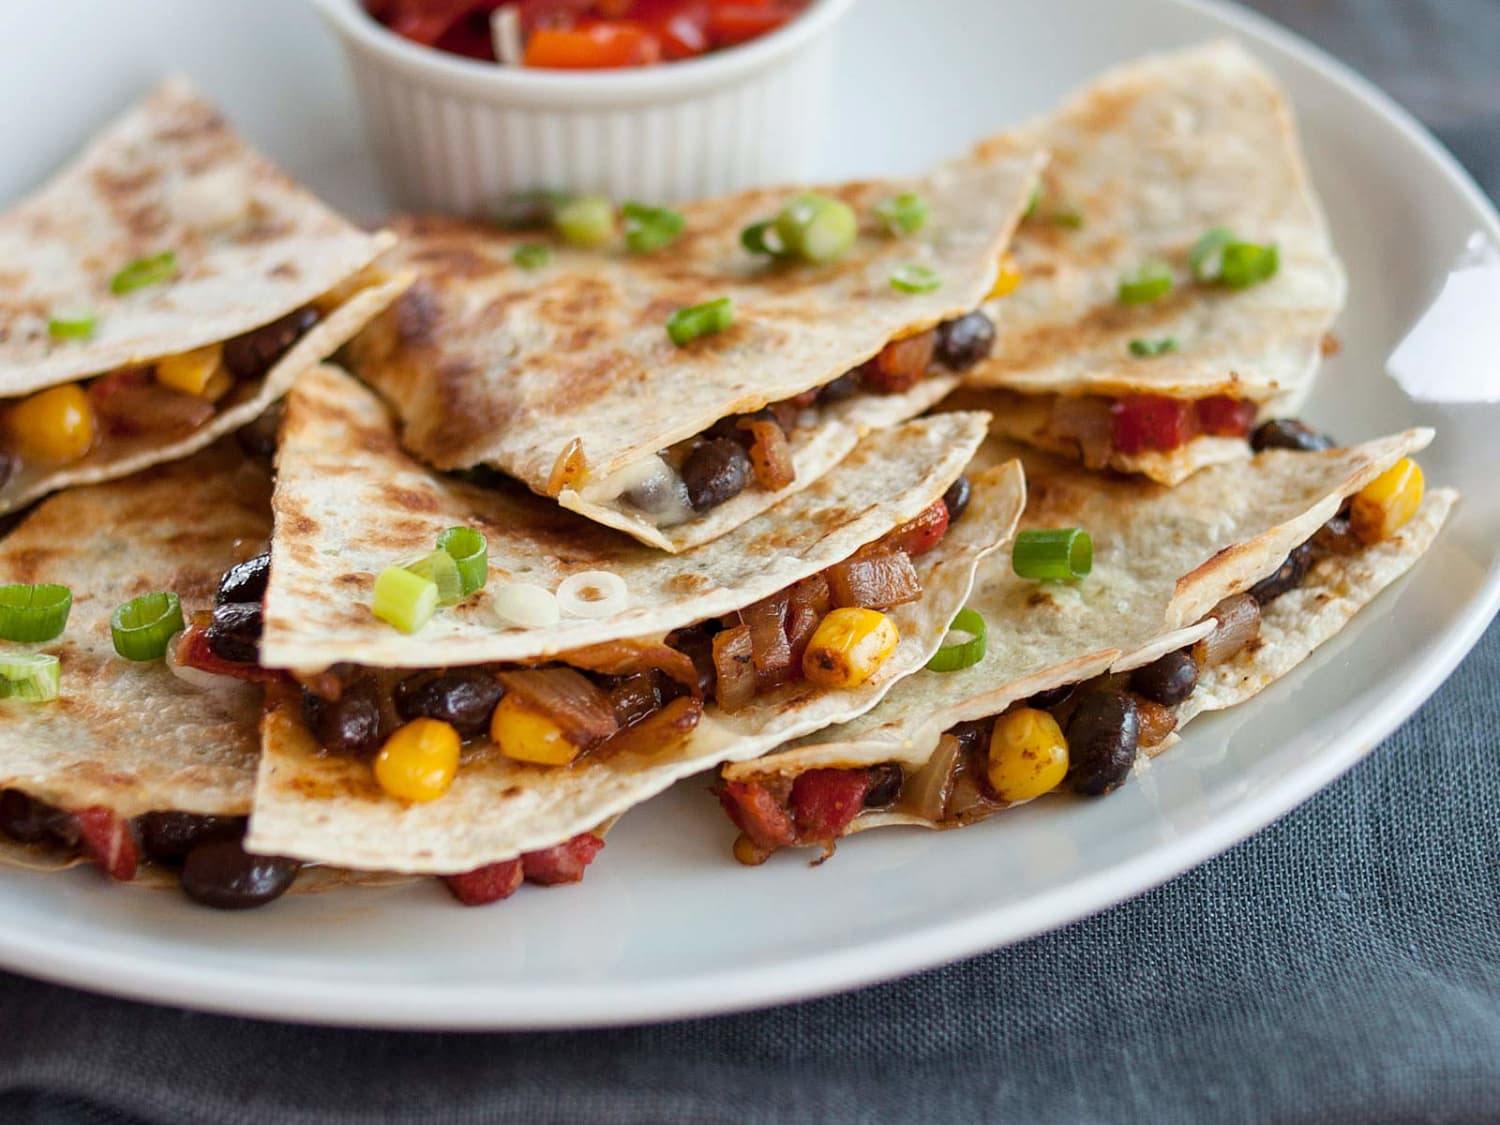 How To Make the Best Cheesy Quesadillas